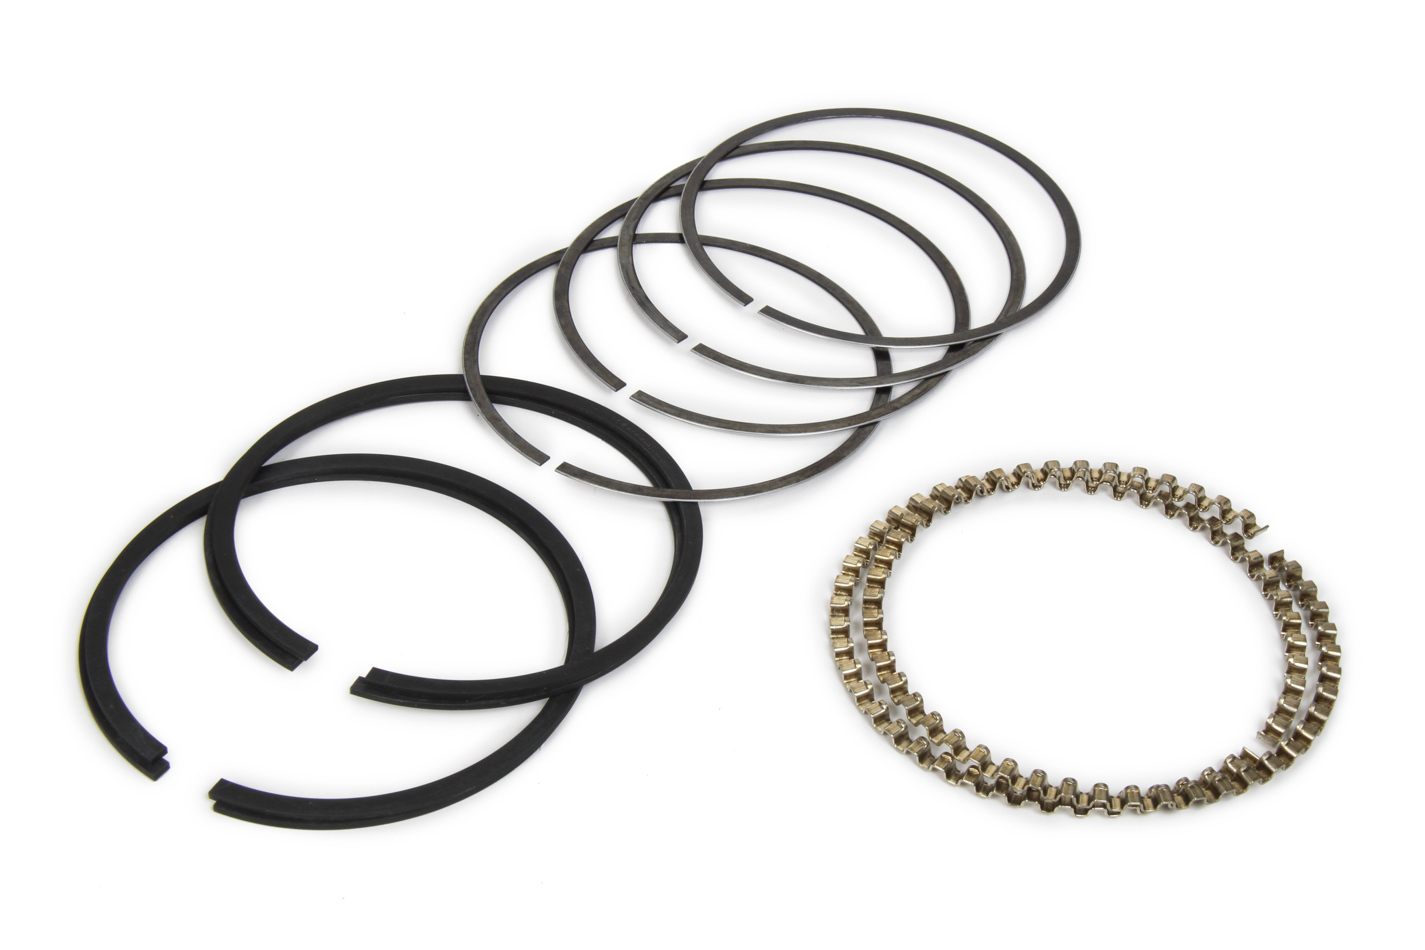 Hastings Piston Rings 6164 Piston Rings, 3.498 in Bore, Drop In, 1/16 x 1/16 x 5/32 in Thick, Standard Tension, Iron, Phosphate, 2-Cylinder, Kit